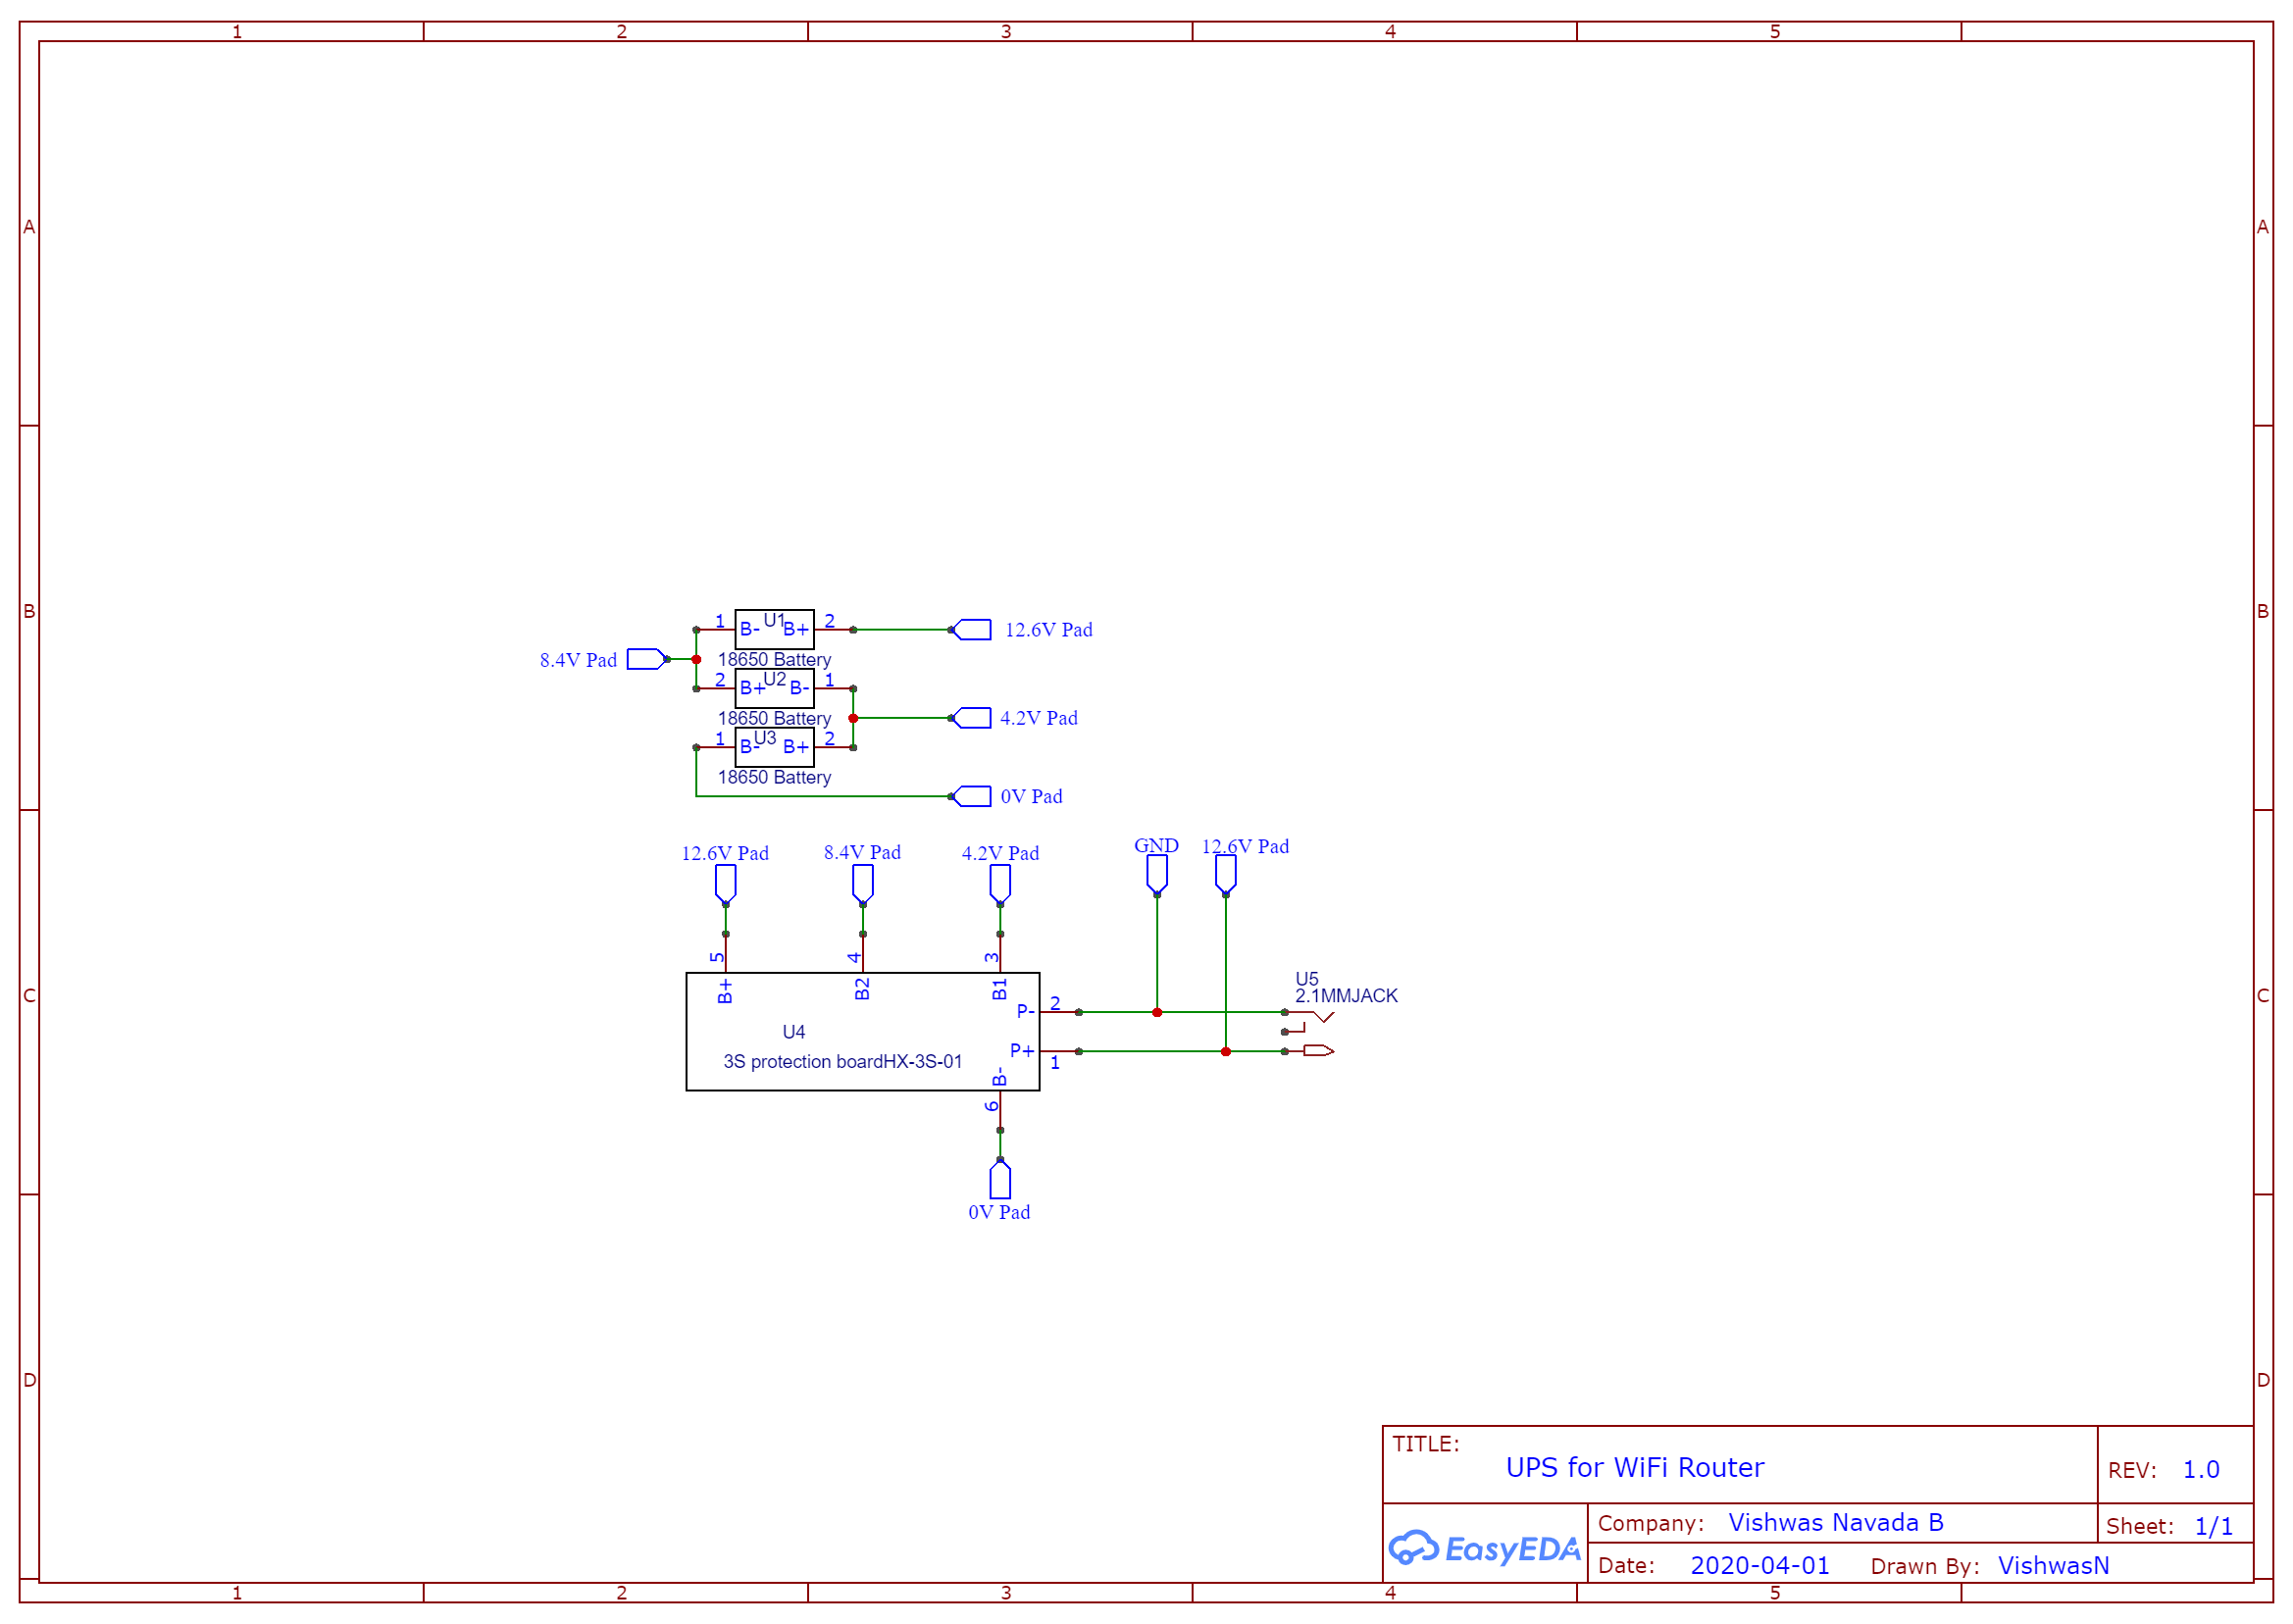 Schematic_Wifi router ups_Sheet_1_20200401195723.png